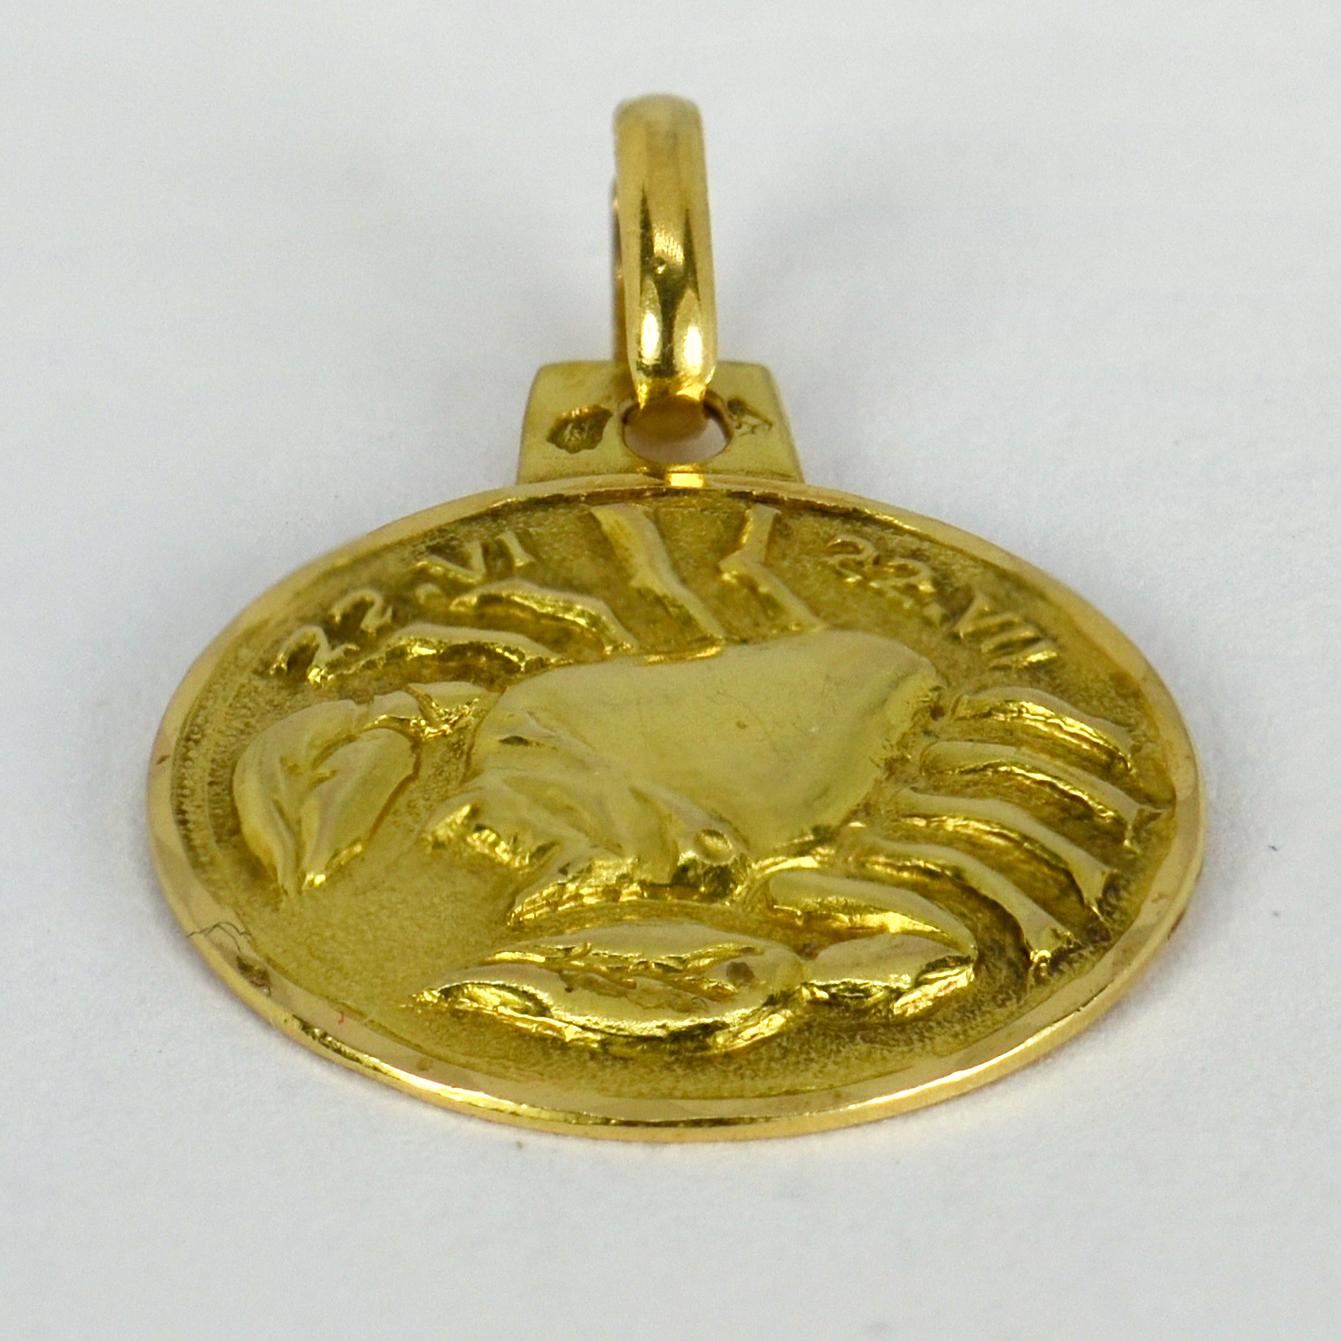 A French 18 karat (18K) yellow gold charm pendant designed as the zodiac star sign of Cancer, depicting a crab with the dates 22-VI – 22-VII. Stamped with the French eagle’s head for 18 karat gold.

Dimensions: 2 x 1.6 x 0.1 cm (not including jump